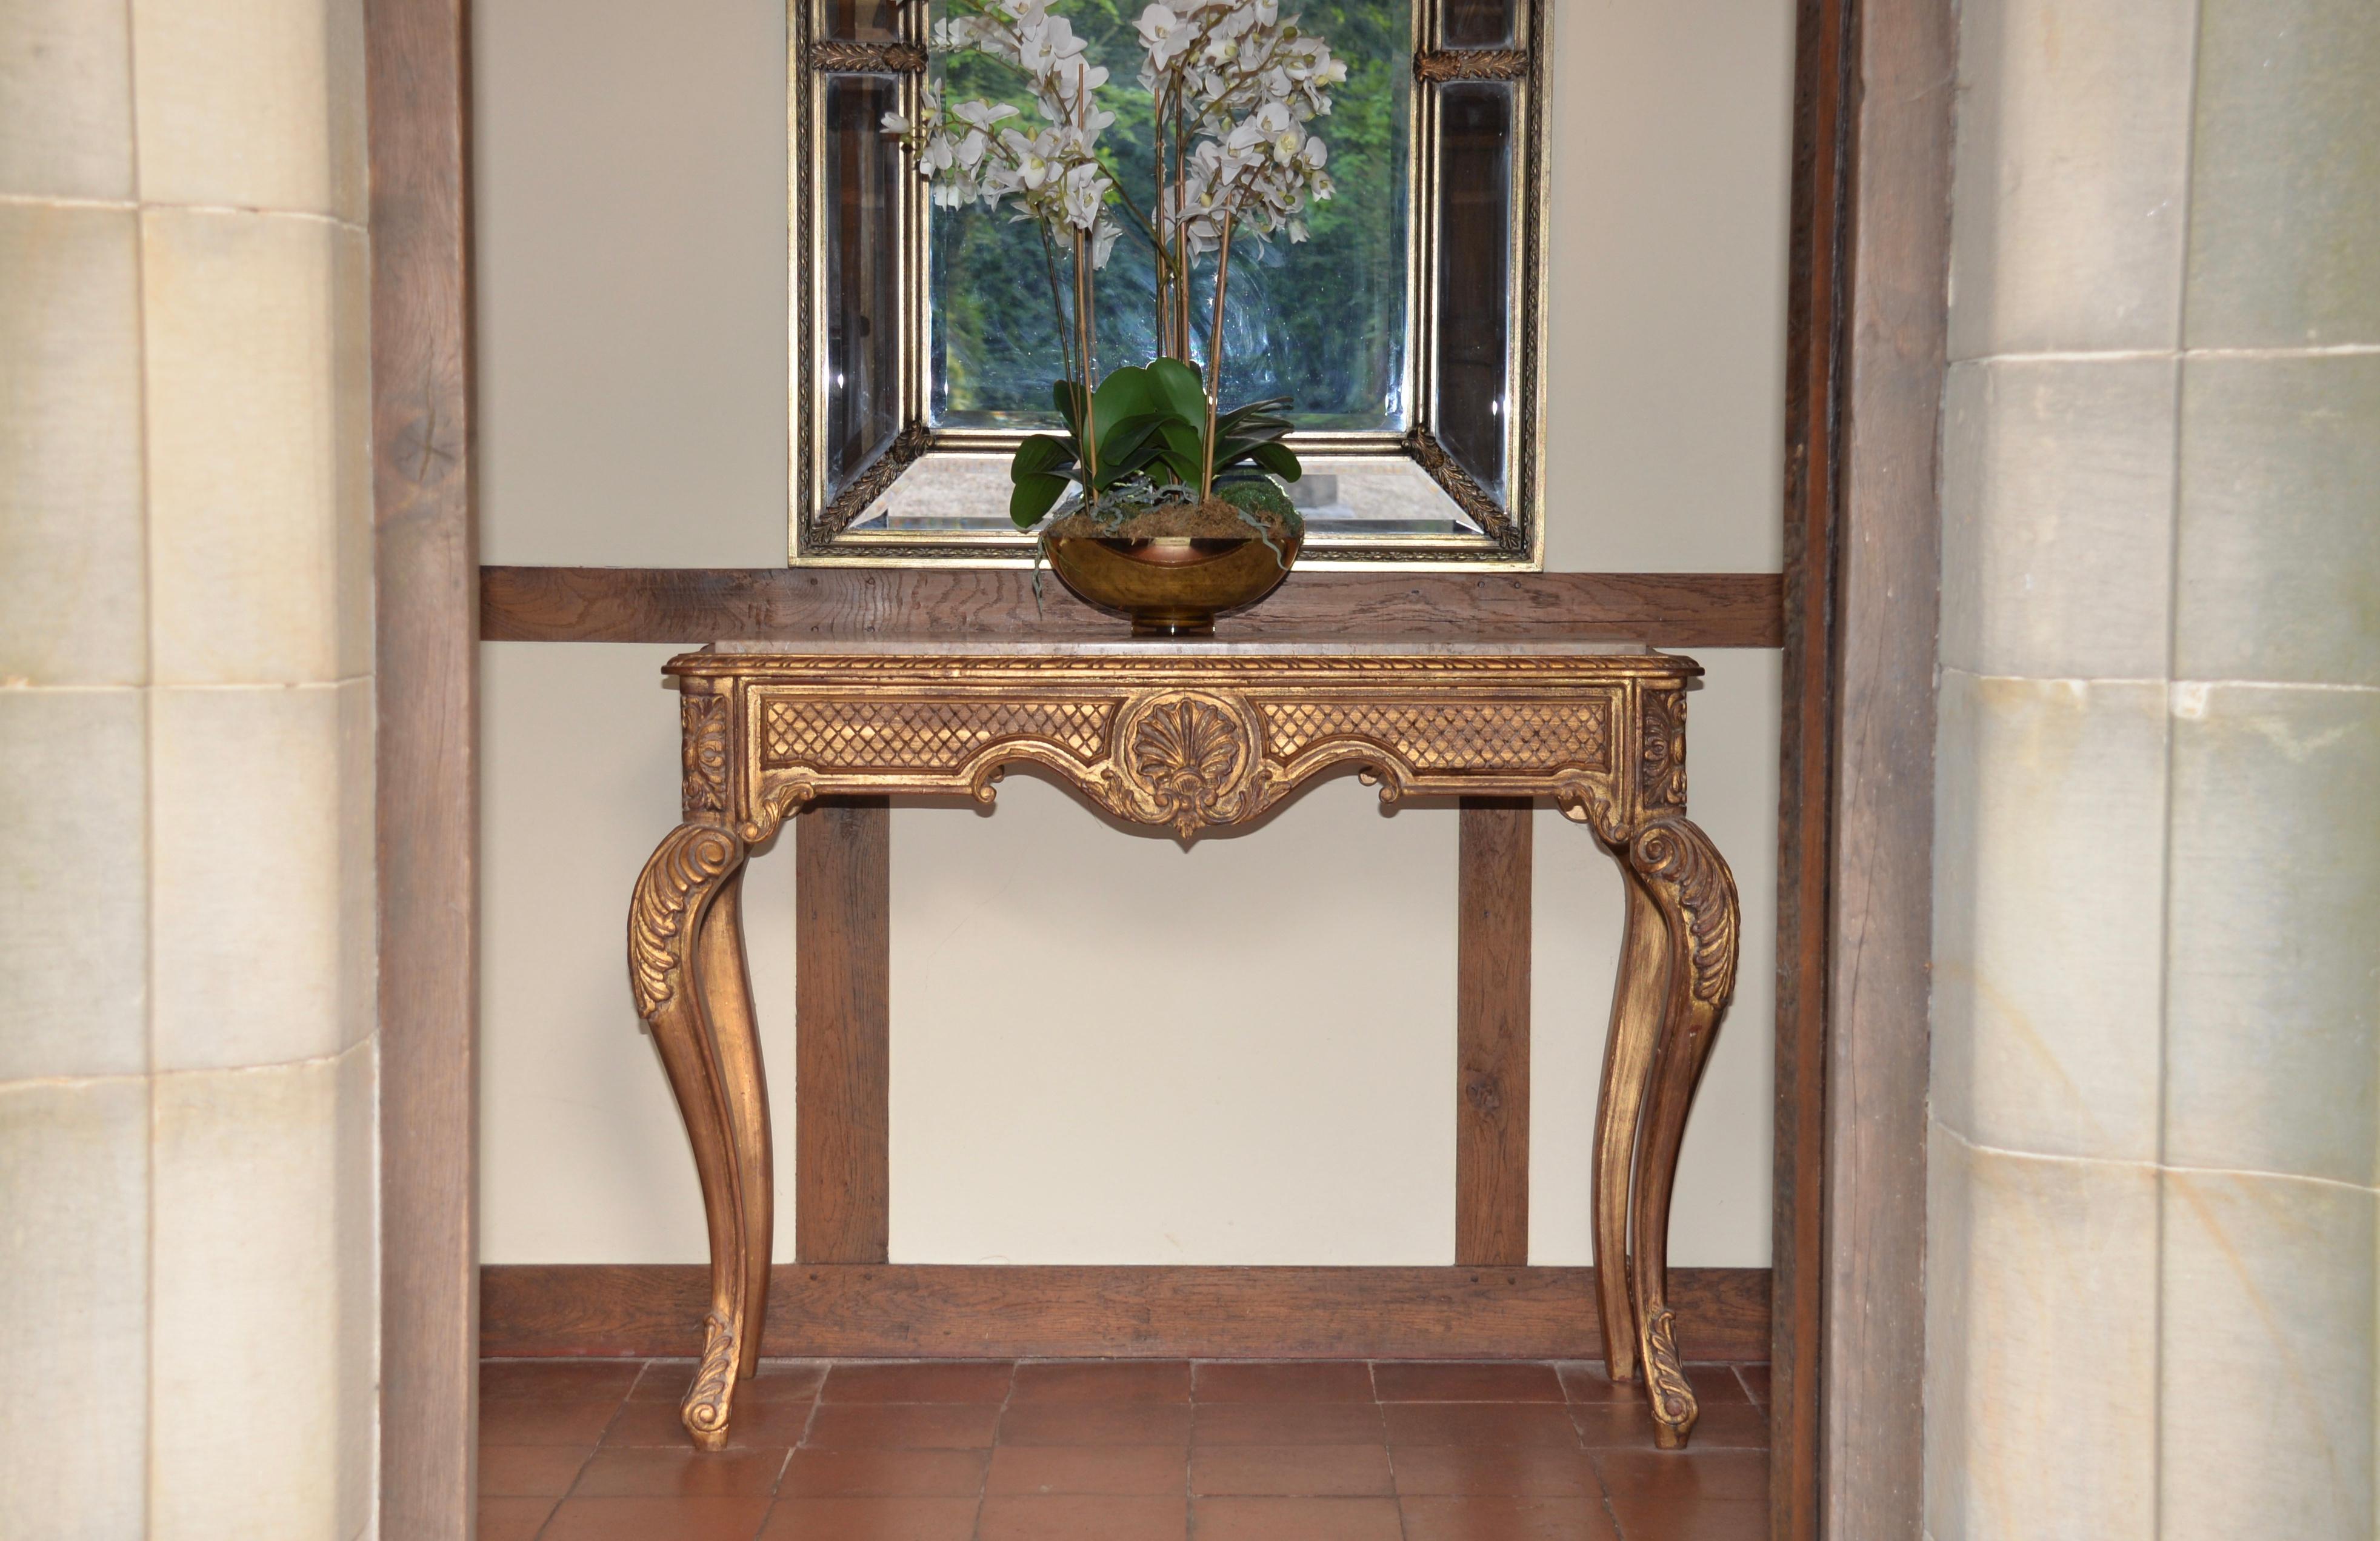 A stunning French vintage gold giltwood and marble top console table. A very striking piece that has beautiful intricate hand carved detail on the wood work. The marble top is genuine solid marble. This item makes for a very striking entrance hall